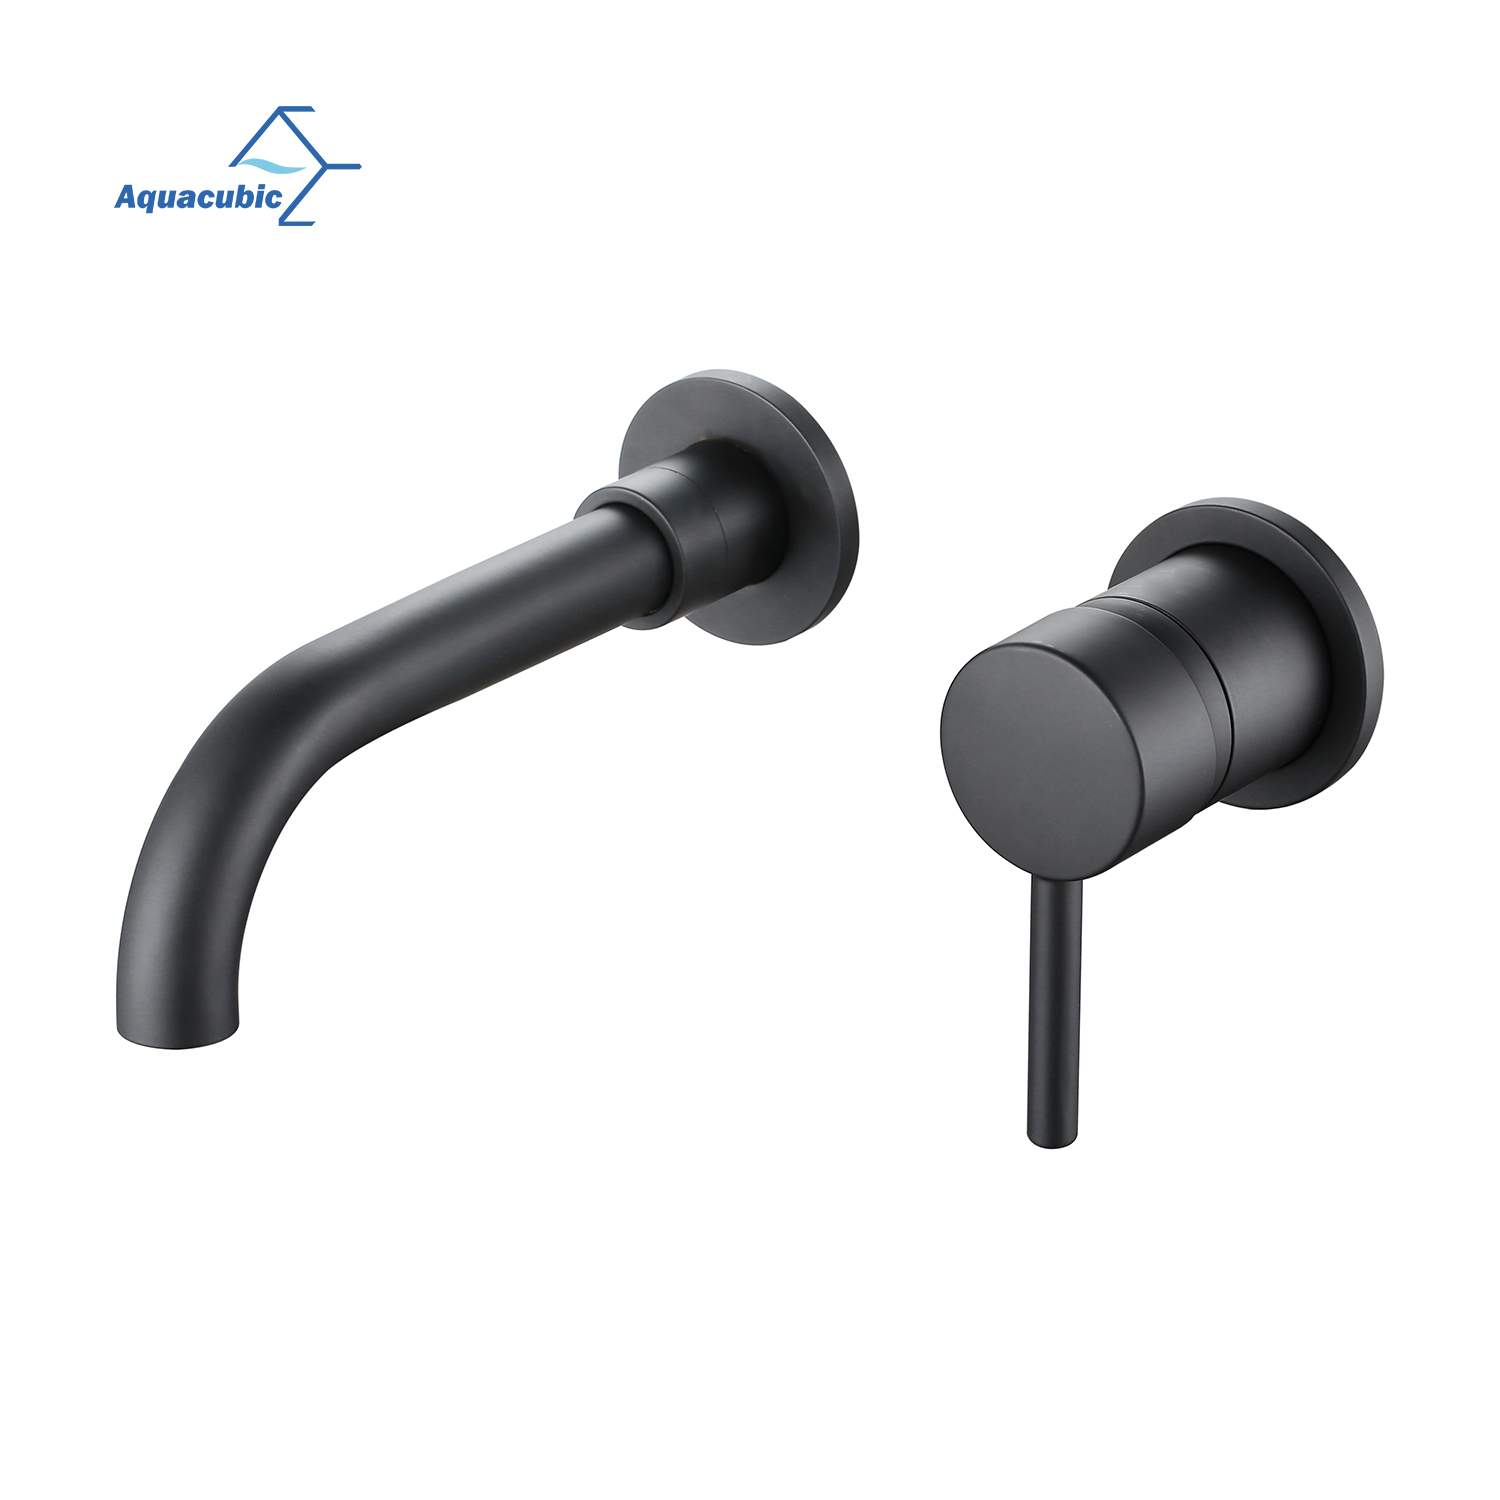 Sanitary Excellent Lead-free Wallmount Faucet